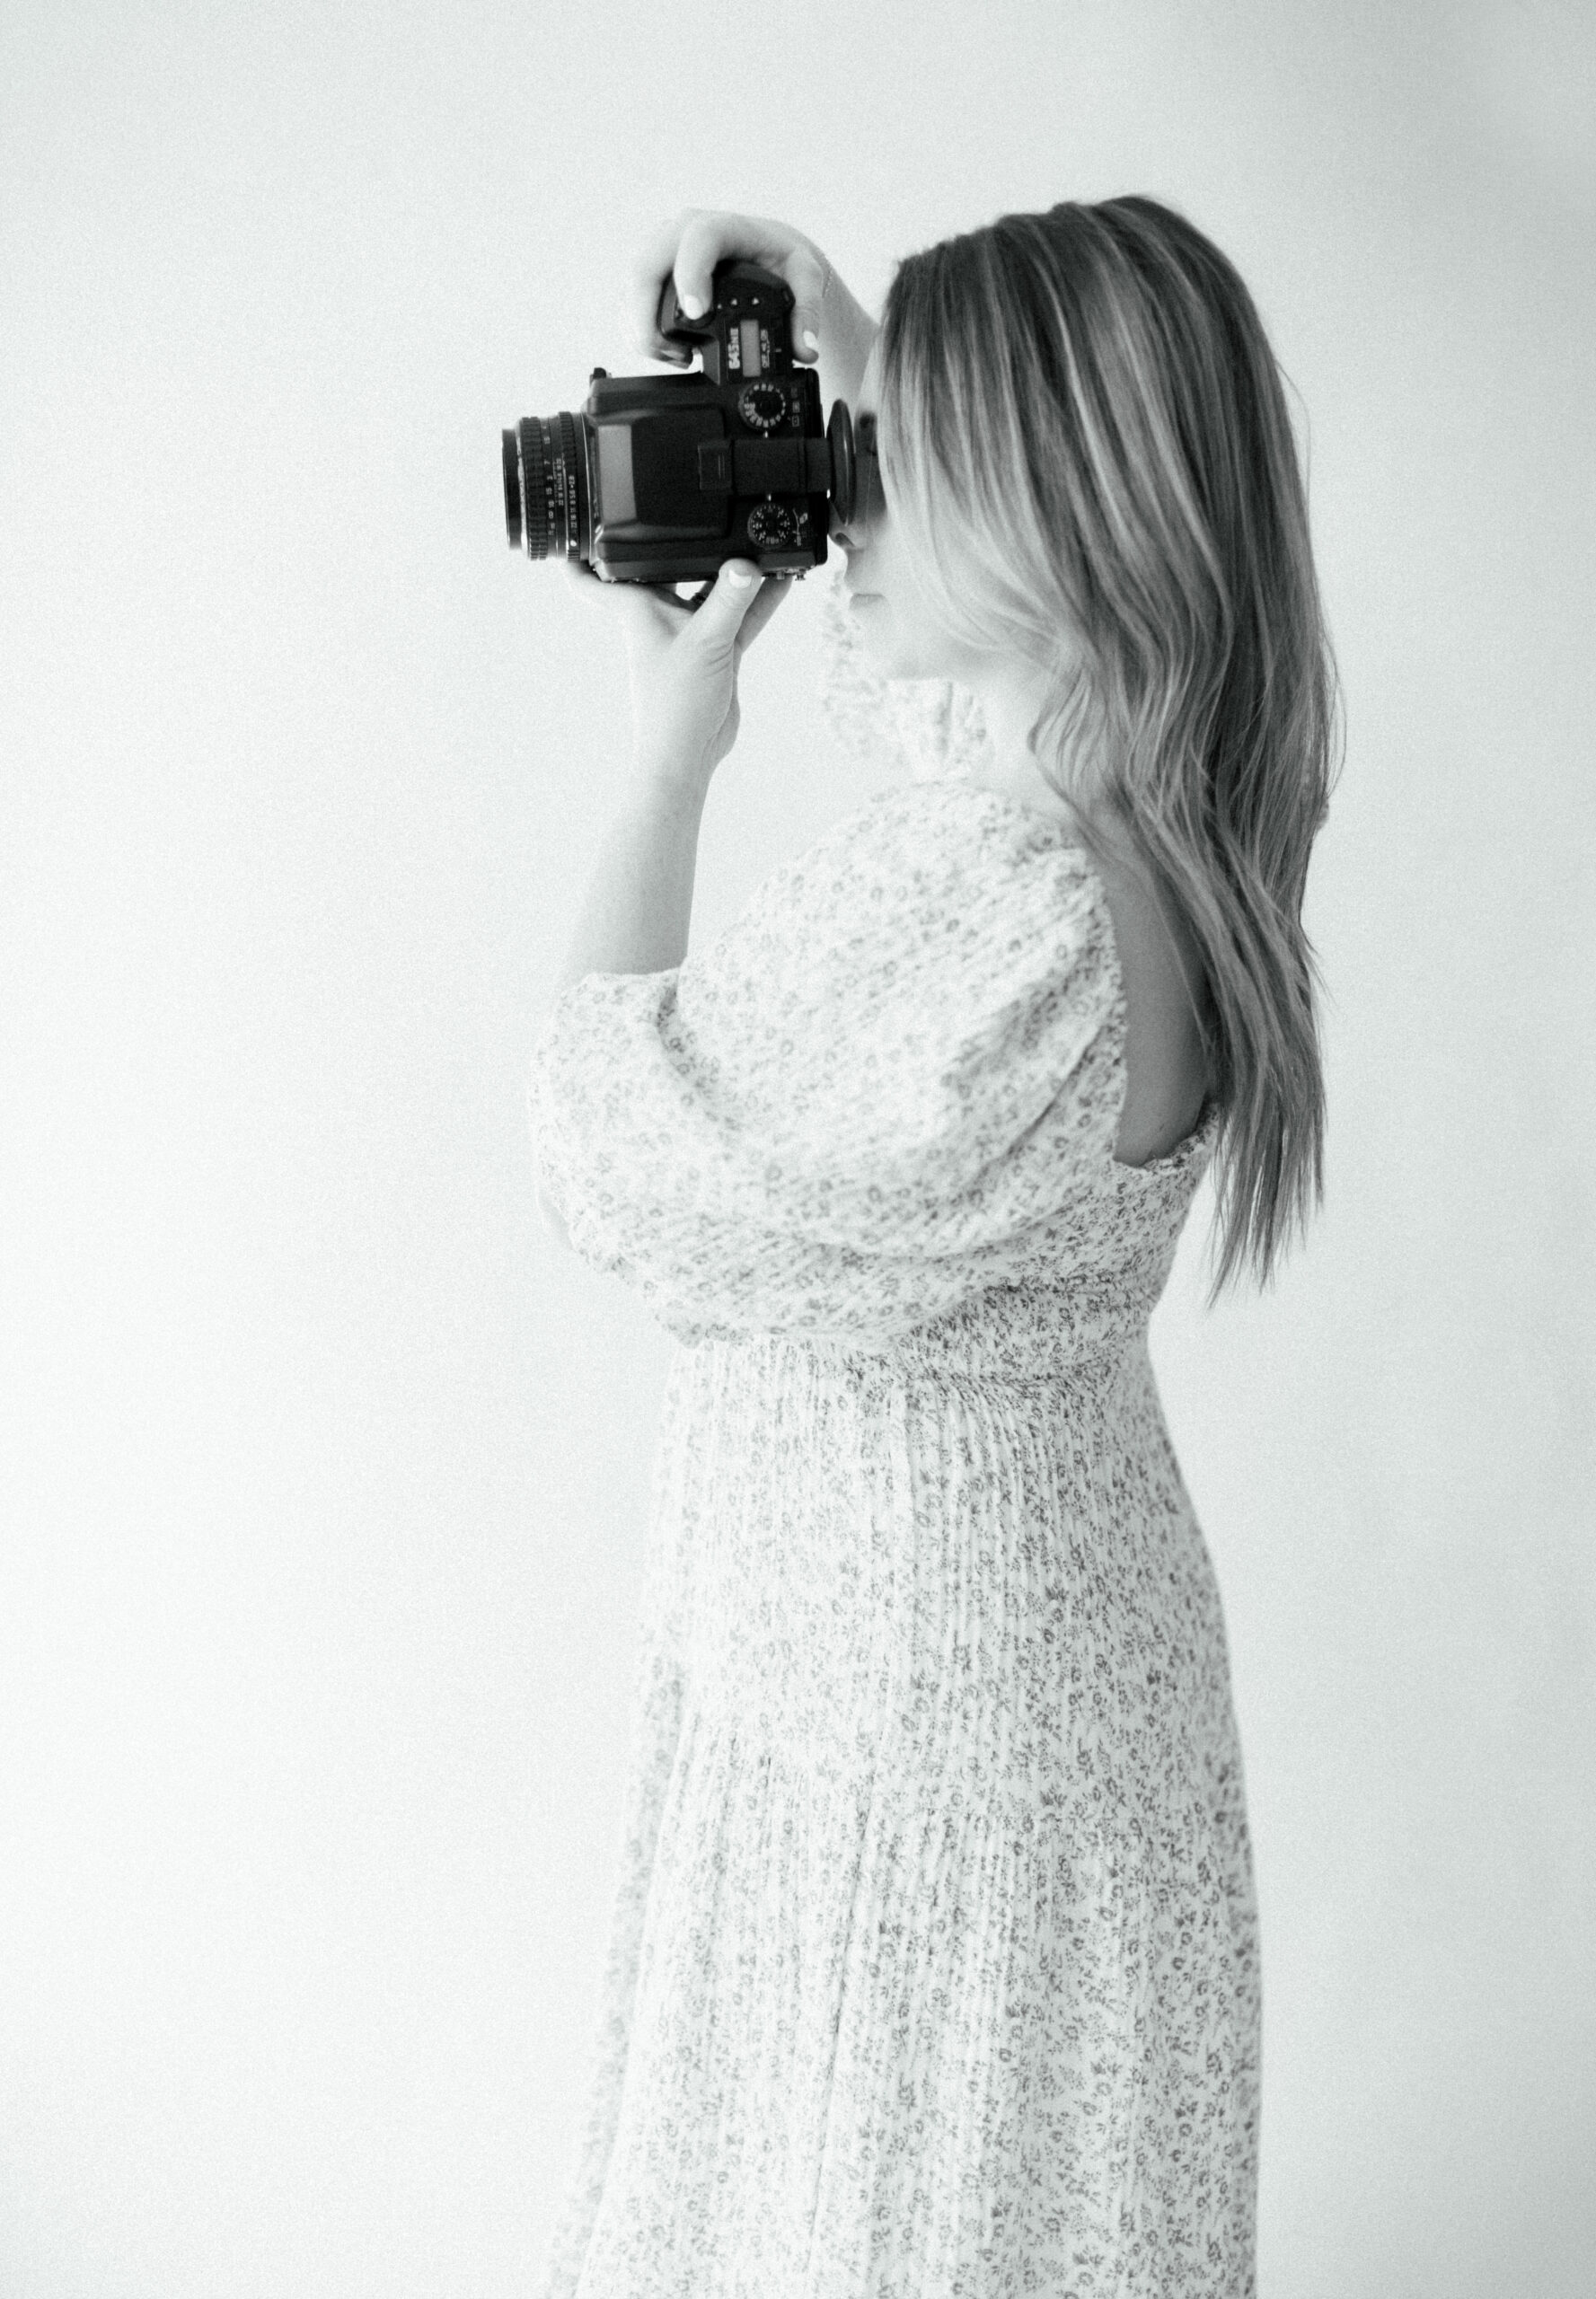 black and white photo of a new Jersey photographer holding a film camera up to her fave